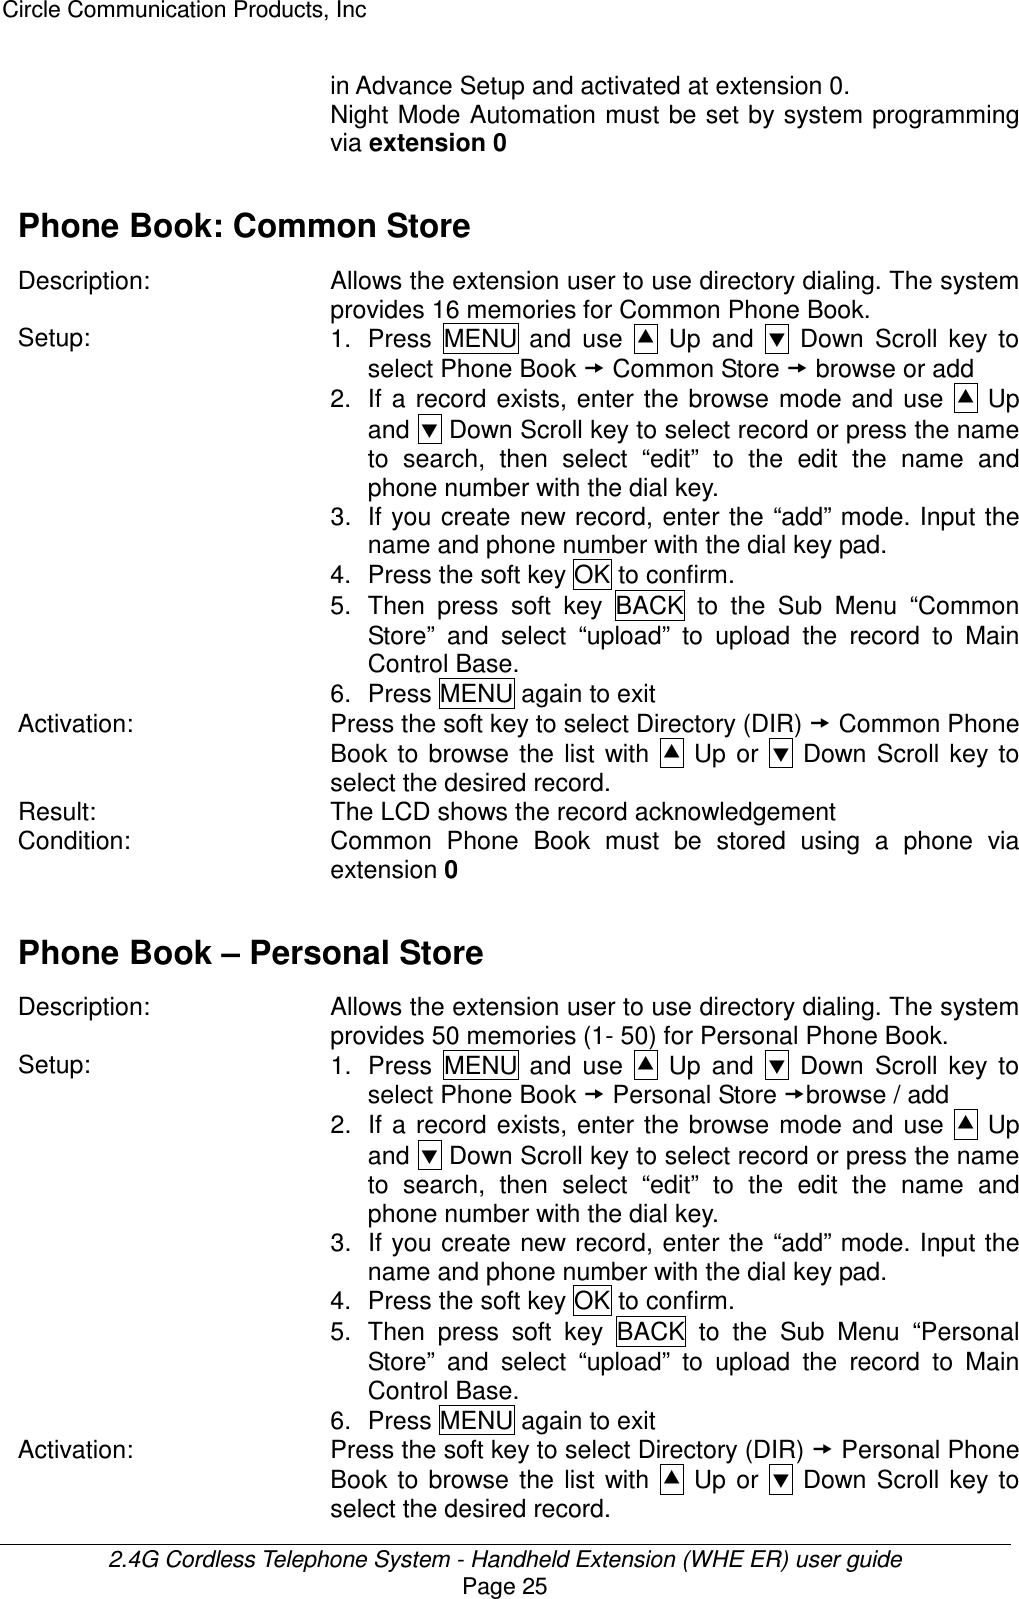 Circle Communication Products, Inc  2.4G Cordless Telephone System - Handheld Extension (WHE ER) user guide Page 25 in Advance Setup and activated at extension 0. Night Mode Automation must be set by system programming via extension 0  Phone Book: Common Store  Description: Allows the extension user to use directory dialing. The system provides 16 memories for Common Phone Book. Setup:  1.  Press  MENU  and  use    Up  and    Down  Scroll  key  to select Phone Book  Common Store  browse or add   2.  If  a  record  exists, enter  the browse  mode  and  use    Up and  Down Scroll key to select record or press the name to  search,  then  select  “edit”  to  the  edit  the  name  and phone number with the dial key. 3. If you create new record, enter the “add” mode. Input the name and phone number with the dial key pad. 4.  Press the soft key OK to confirm. 5.  Then  press  soft  key  BACK  to  the  Sub  Menu  “Common Store”  and  select  “upload”  to  upload  the  record  to  Main Control Base.   6.  Press MENU again to exit Activation:  Press the soft key to select Directory (DIR)  Common Phone Book  to  browse  the  list  with    Up  or    Down  Scroll  key  to select the desired record. Result:  The LCD shows the record acknowledgement Condition: Common  Phone  Book  must  be  stored  using  a  phone  via extension 0  Phone Book – Personal Store  Description: Allows the extension user to use directory dialing. The system provides 50 memories (1- 50) for Personal Phone Book.   Setup:  1.  Press  MENU  and  use    Up  and    Down  Scroll  key  to select Phone Book  Personal Store browse / add 2.  If  a  record  exists, enter  the browse  mode  and  use    Up and  Down Scroll key to select record or press the name to  search,  then  select  “edit”  to  the  edit  the  name  and phone number with the dial key. 3.  If  you create new record, enter the “add” mode. Input the name and phone number with the dial key pad. 4.  Press the soft key OK to confirm. 5.  Then  press  soft  key  BACK  to  the  Sub  Menu  “Personal Store”  and  select  “upload”  to  upload  the  record  to  Main Control Base.   6.  Press MENU again to exit Activation:  Press the soft key to select Directory (DIR)  Personal Phone Book  to  browse  the  list  with    Up  or    Down  Scroll  key  to select the desired record. 